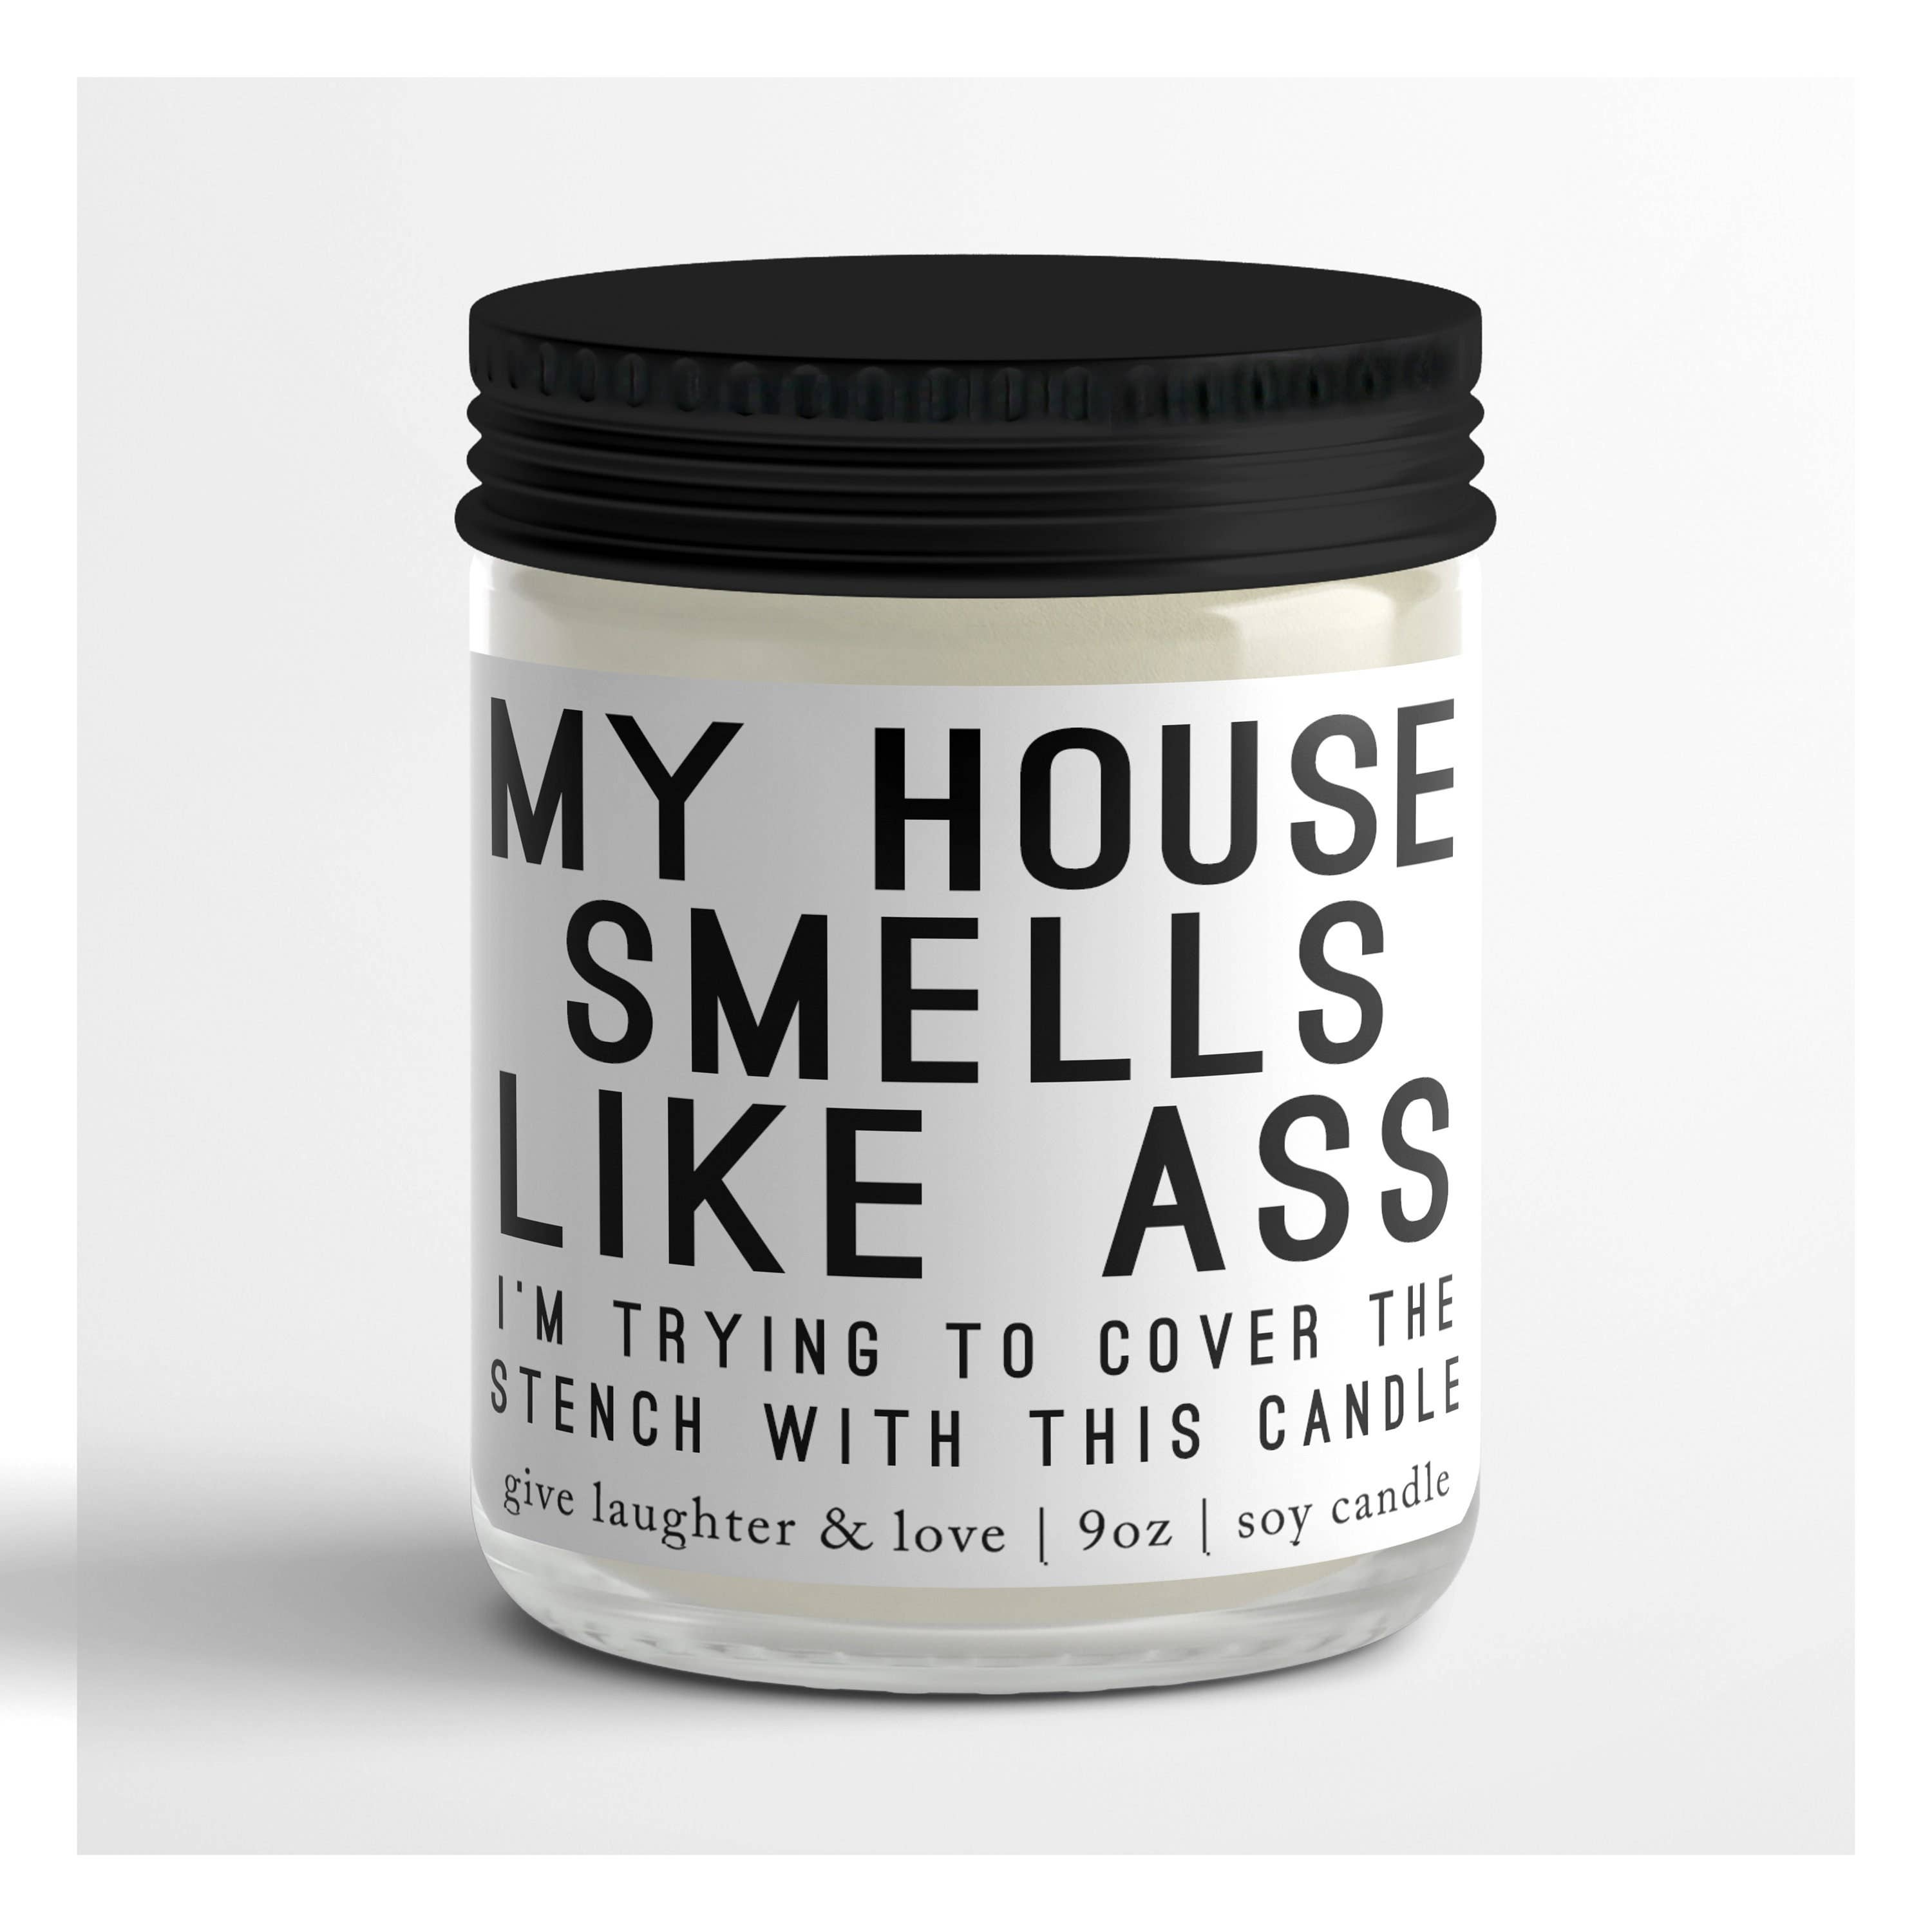 There's Some Ho's In This House Candle, Funny Christmas Candle, 9oz